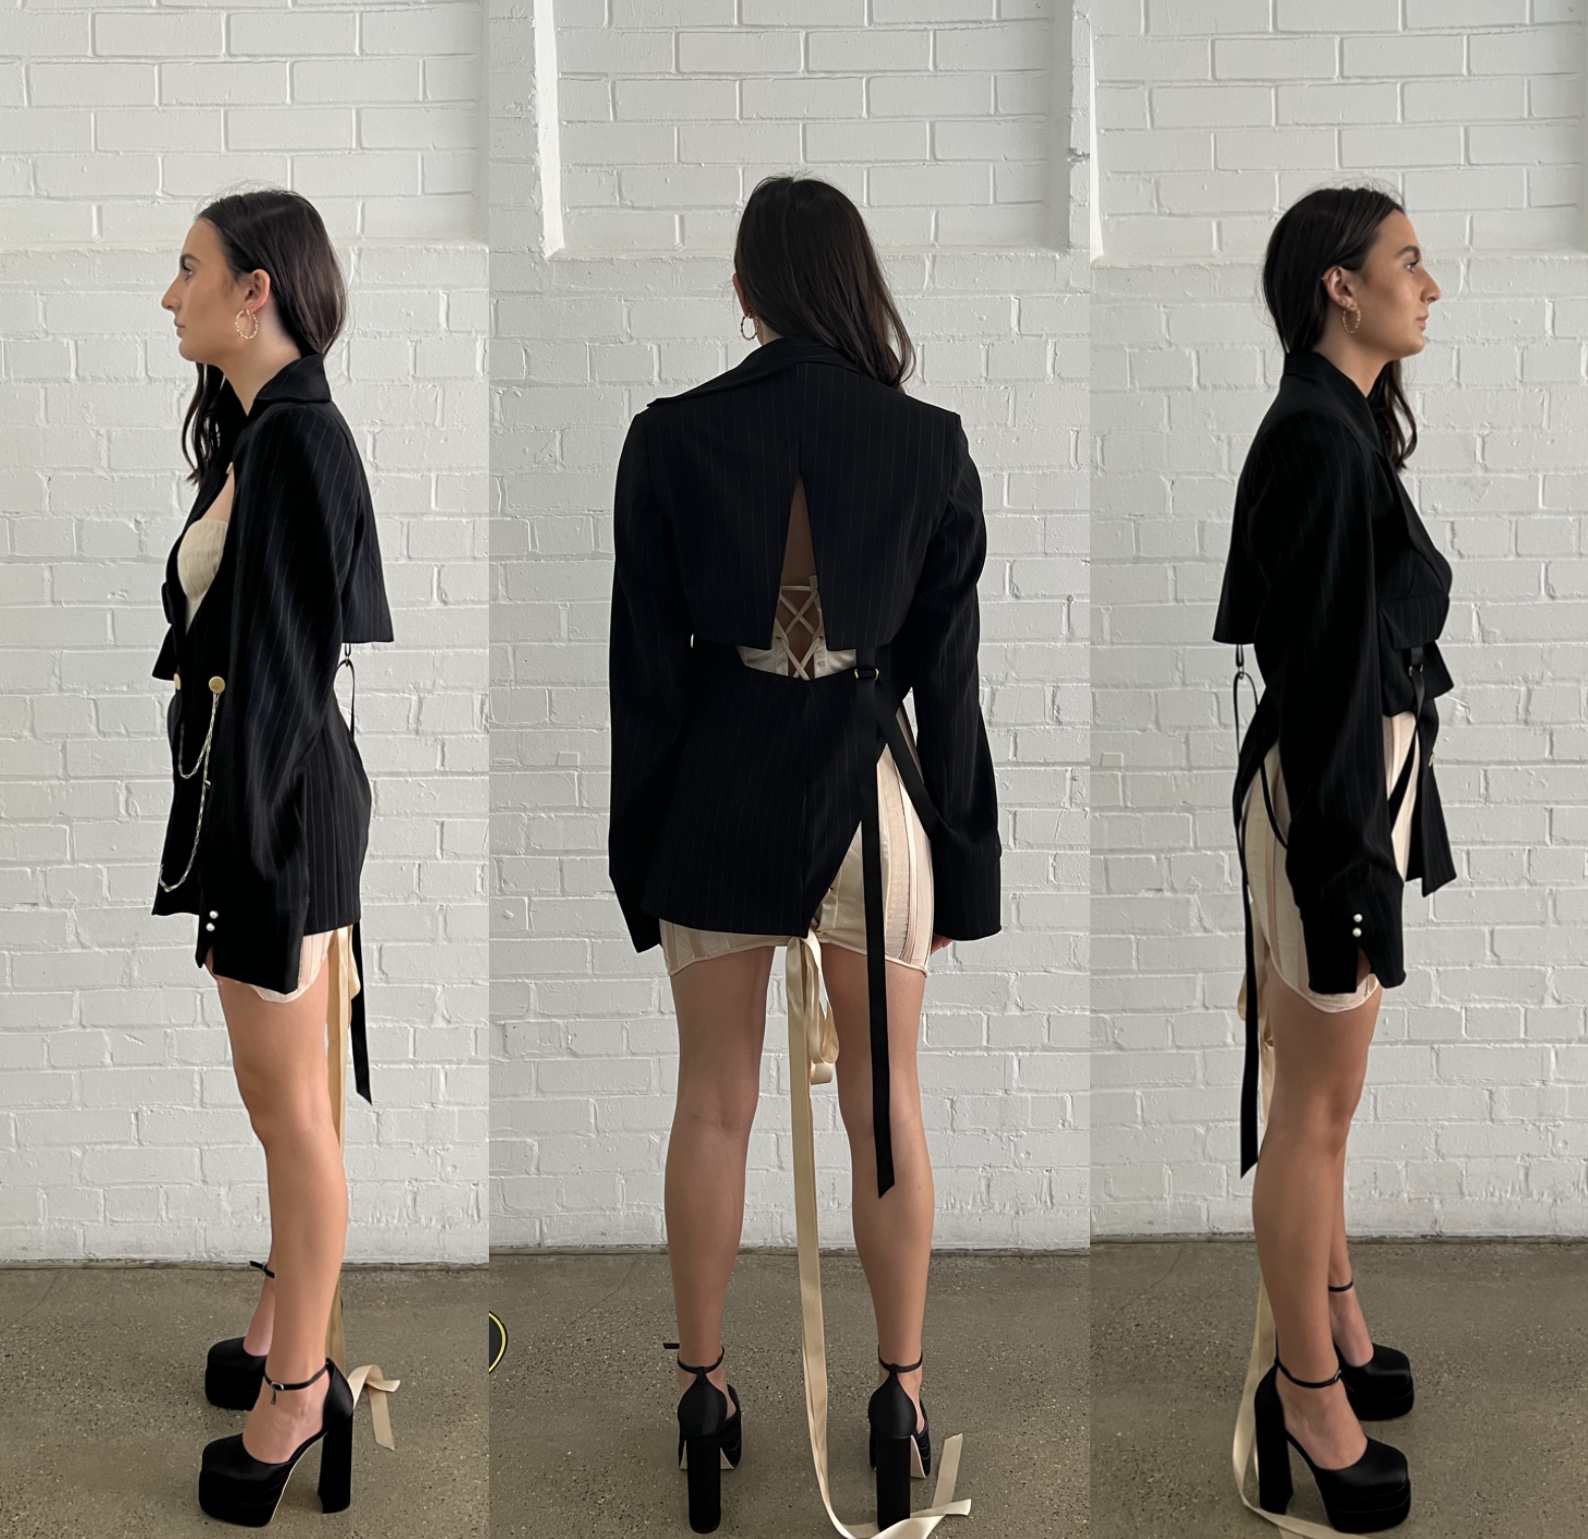 Back and side views of look two from my graduate collection 2POINT0.